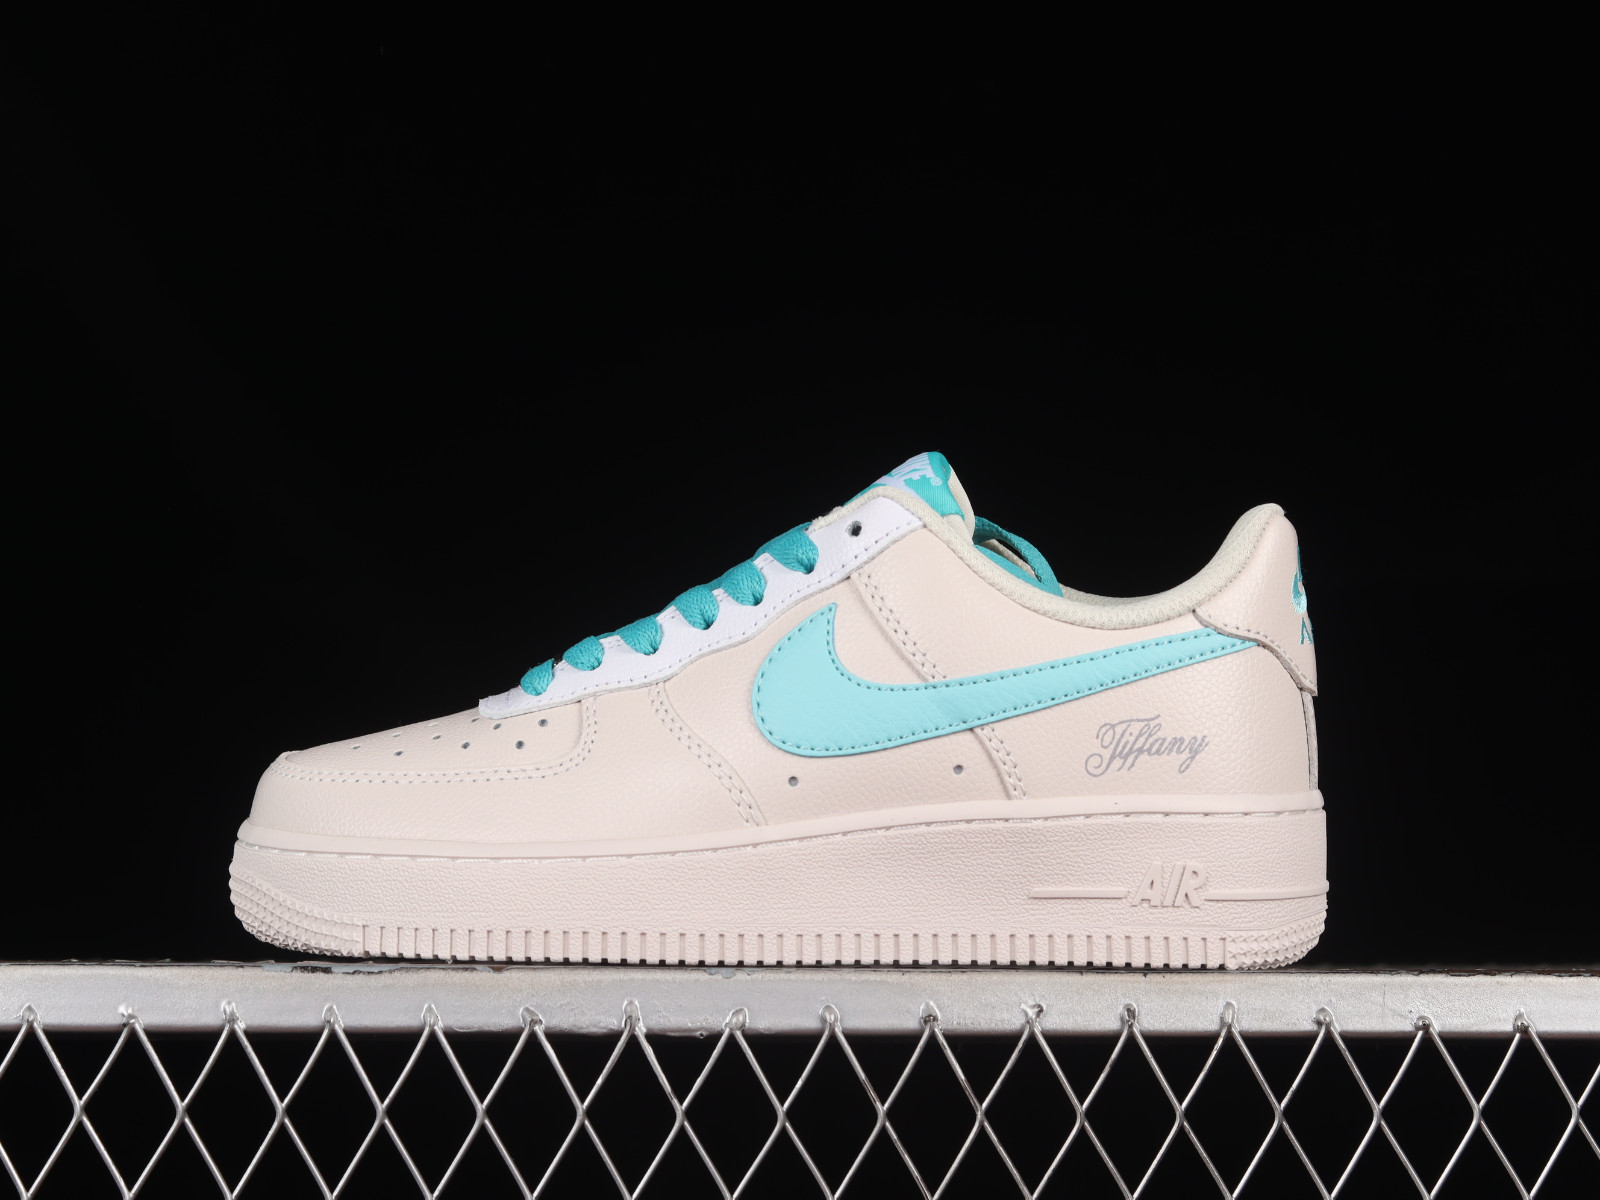 211 - NwfpsShops - on Fruity and LeBron Could Soon Drop a Nike Dunk - Tiffany & Co. x Nike Air Force 1 07 Low SP Friends and Family Off - White DZ1382